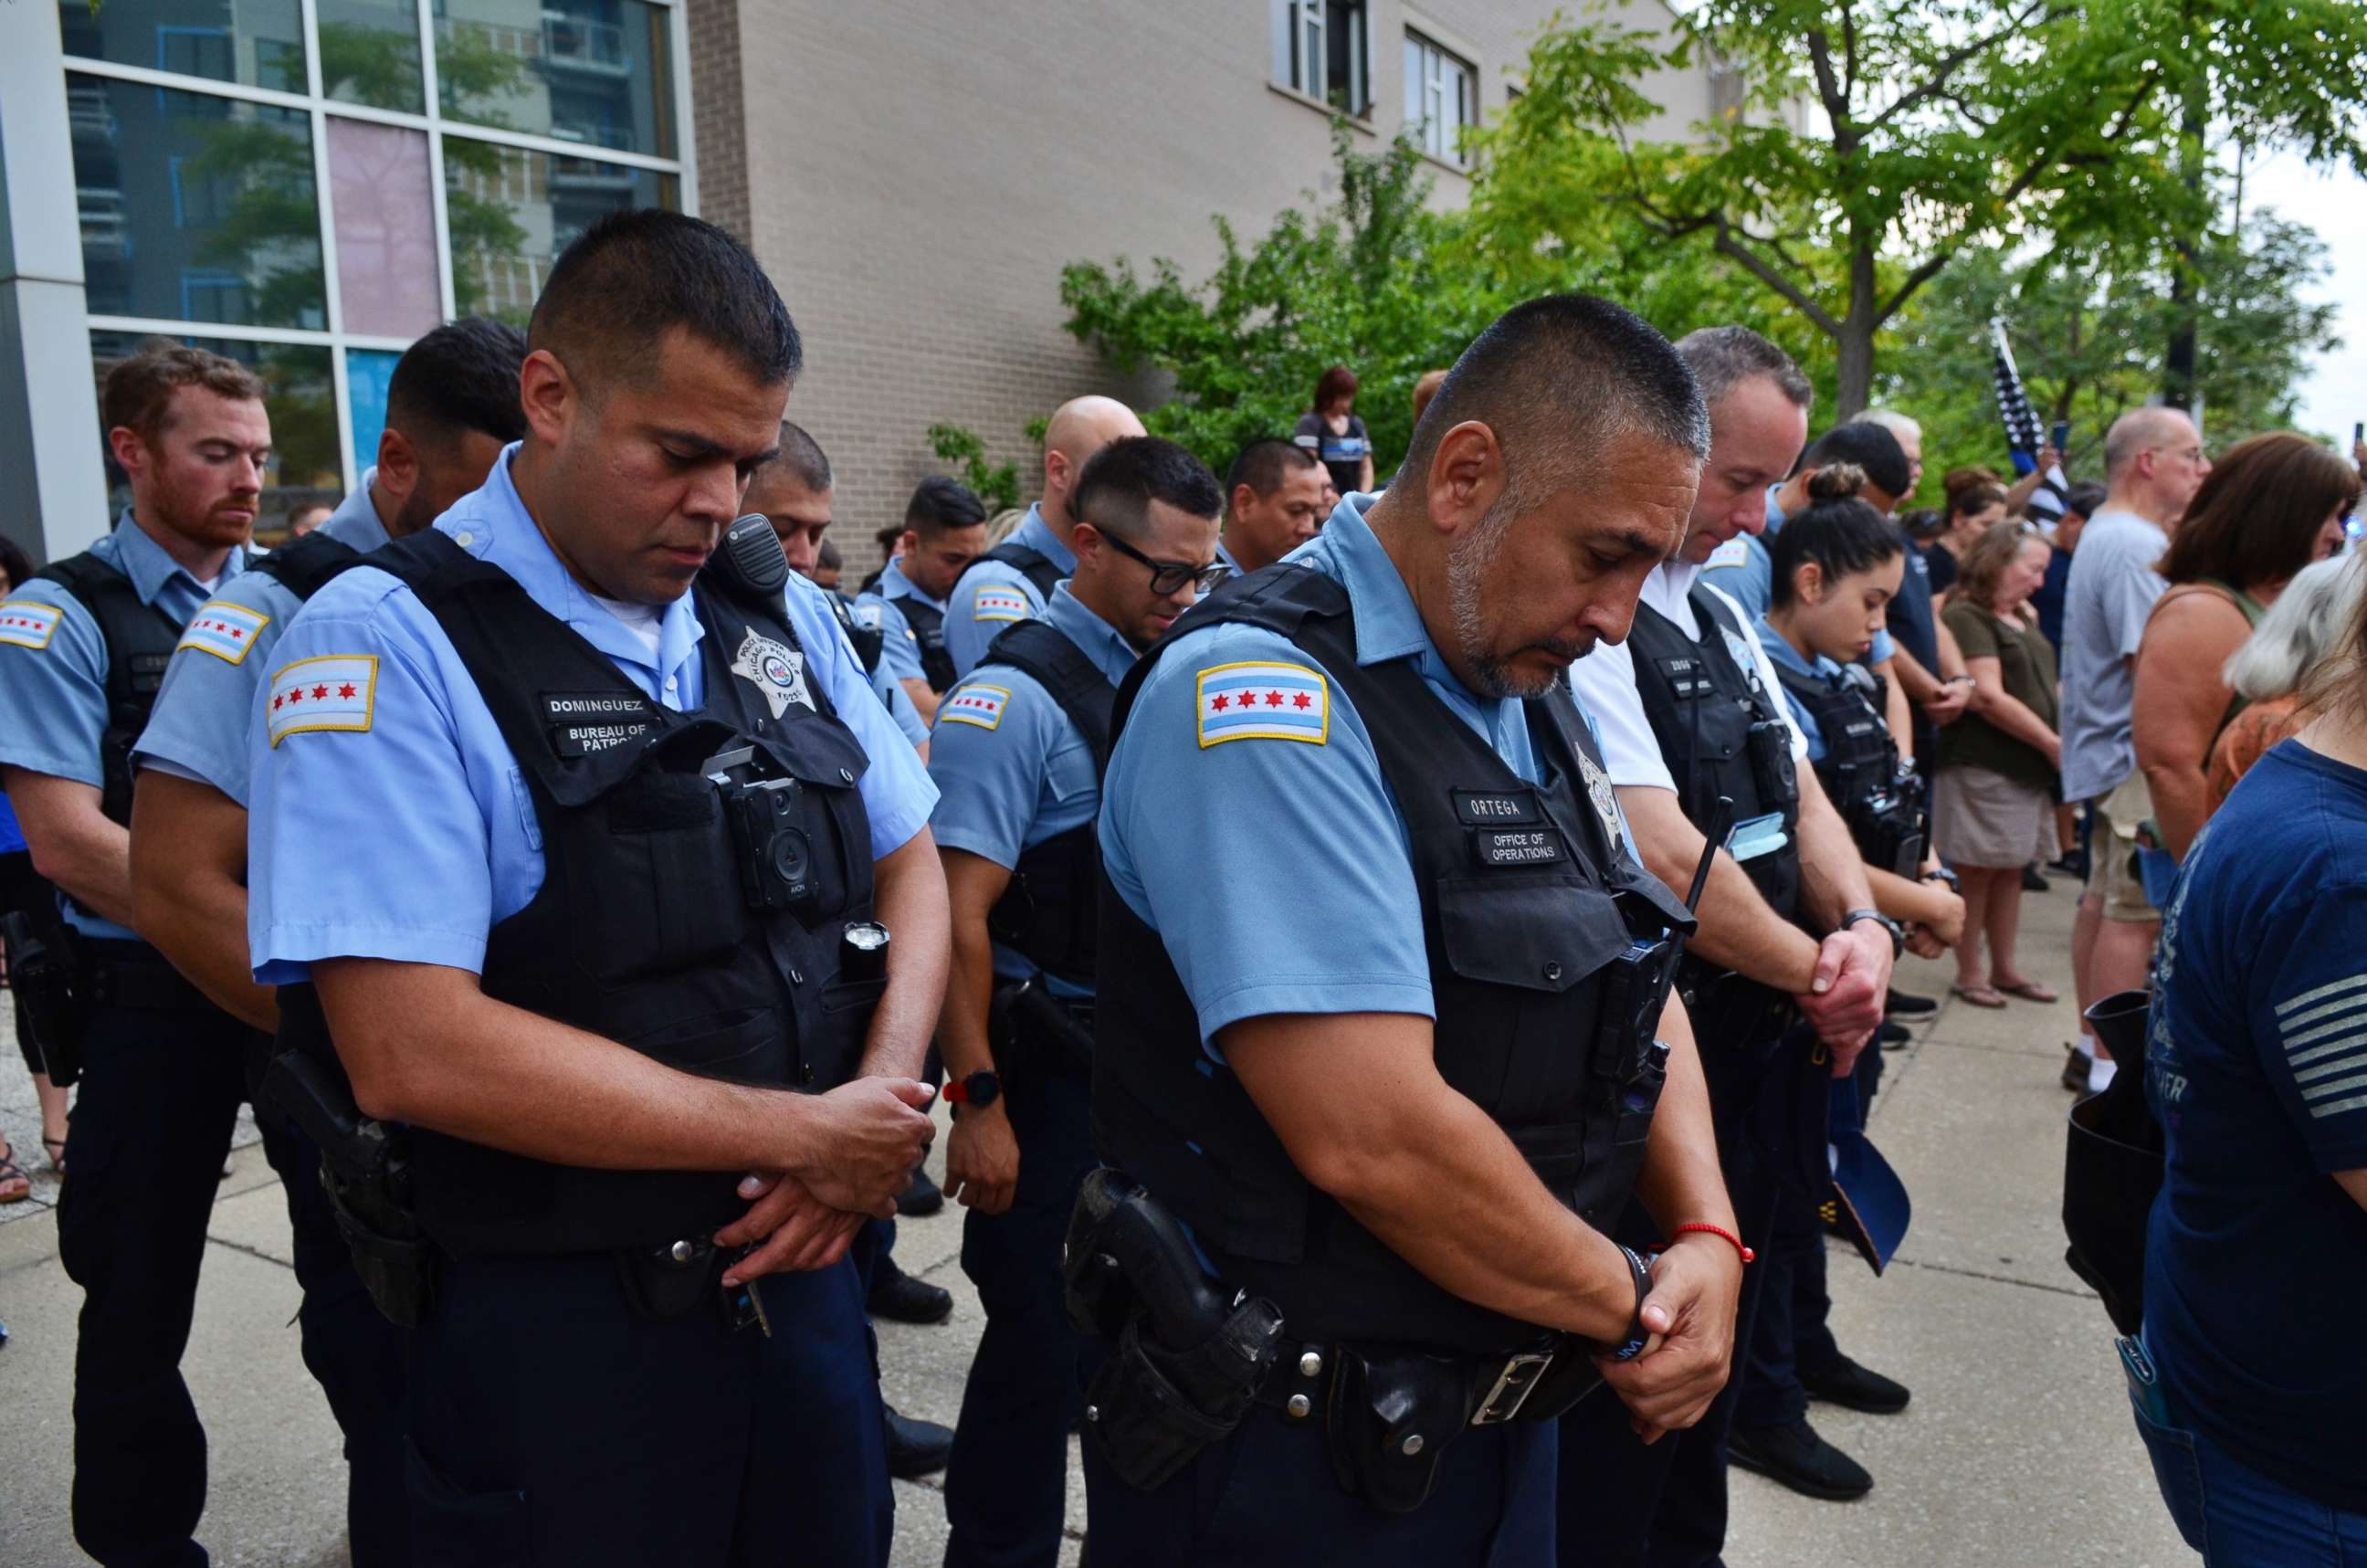 PHOTO: A prayer vigil was held in remembrance of Police Officer Ella French and her partner who was badly wounded, on Aug. 11, 2021, in Chicago at the 16th District Chicago Police Department.